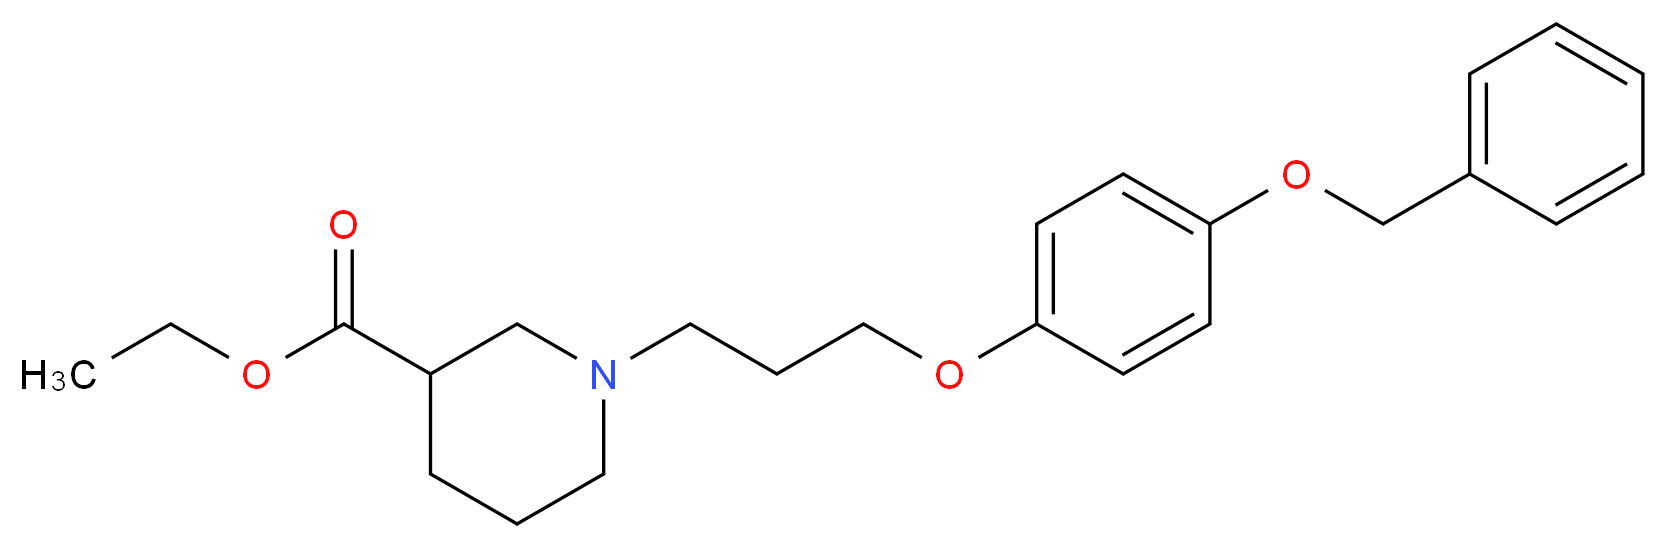 Ethyl 1-{3-[4-(benzyloxy)phenoxy]propyl}-3-piperidinecarboxylate_Molecular_structure_CAS_937602-25-0)